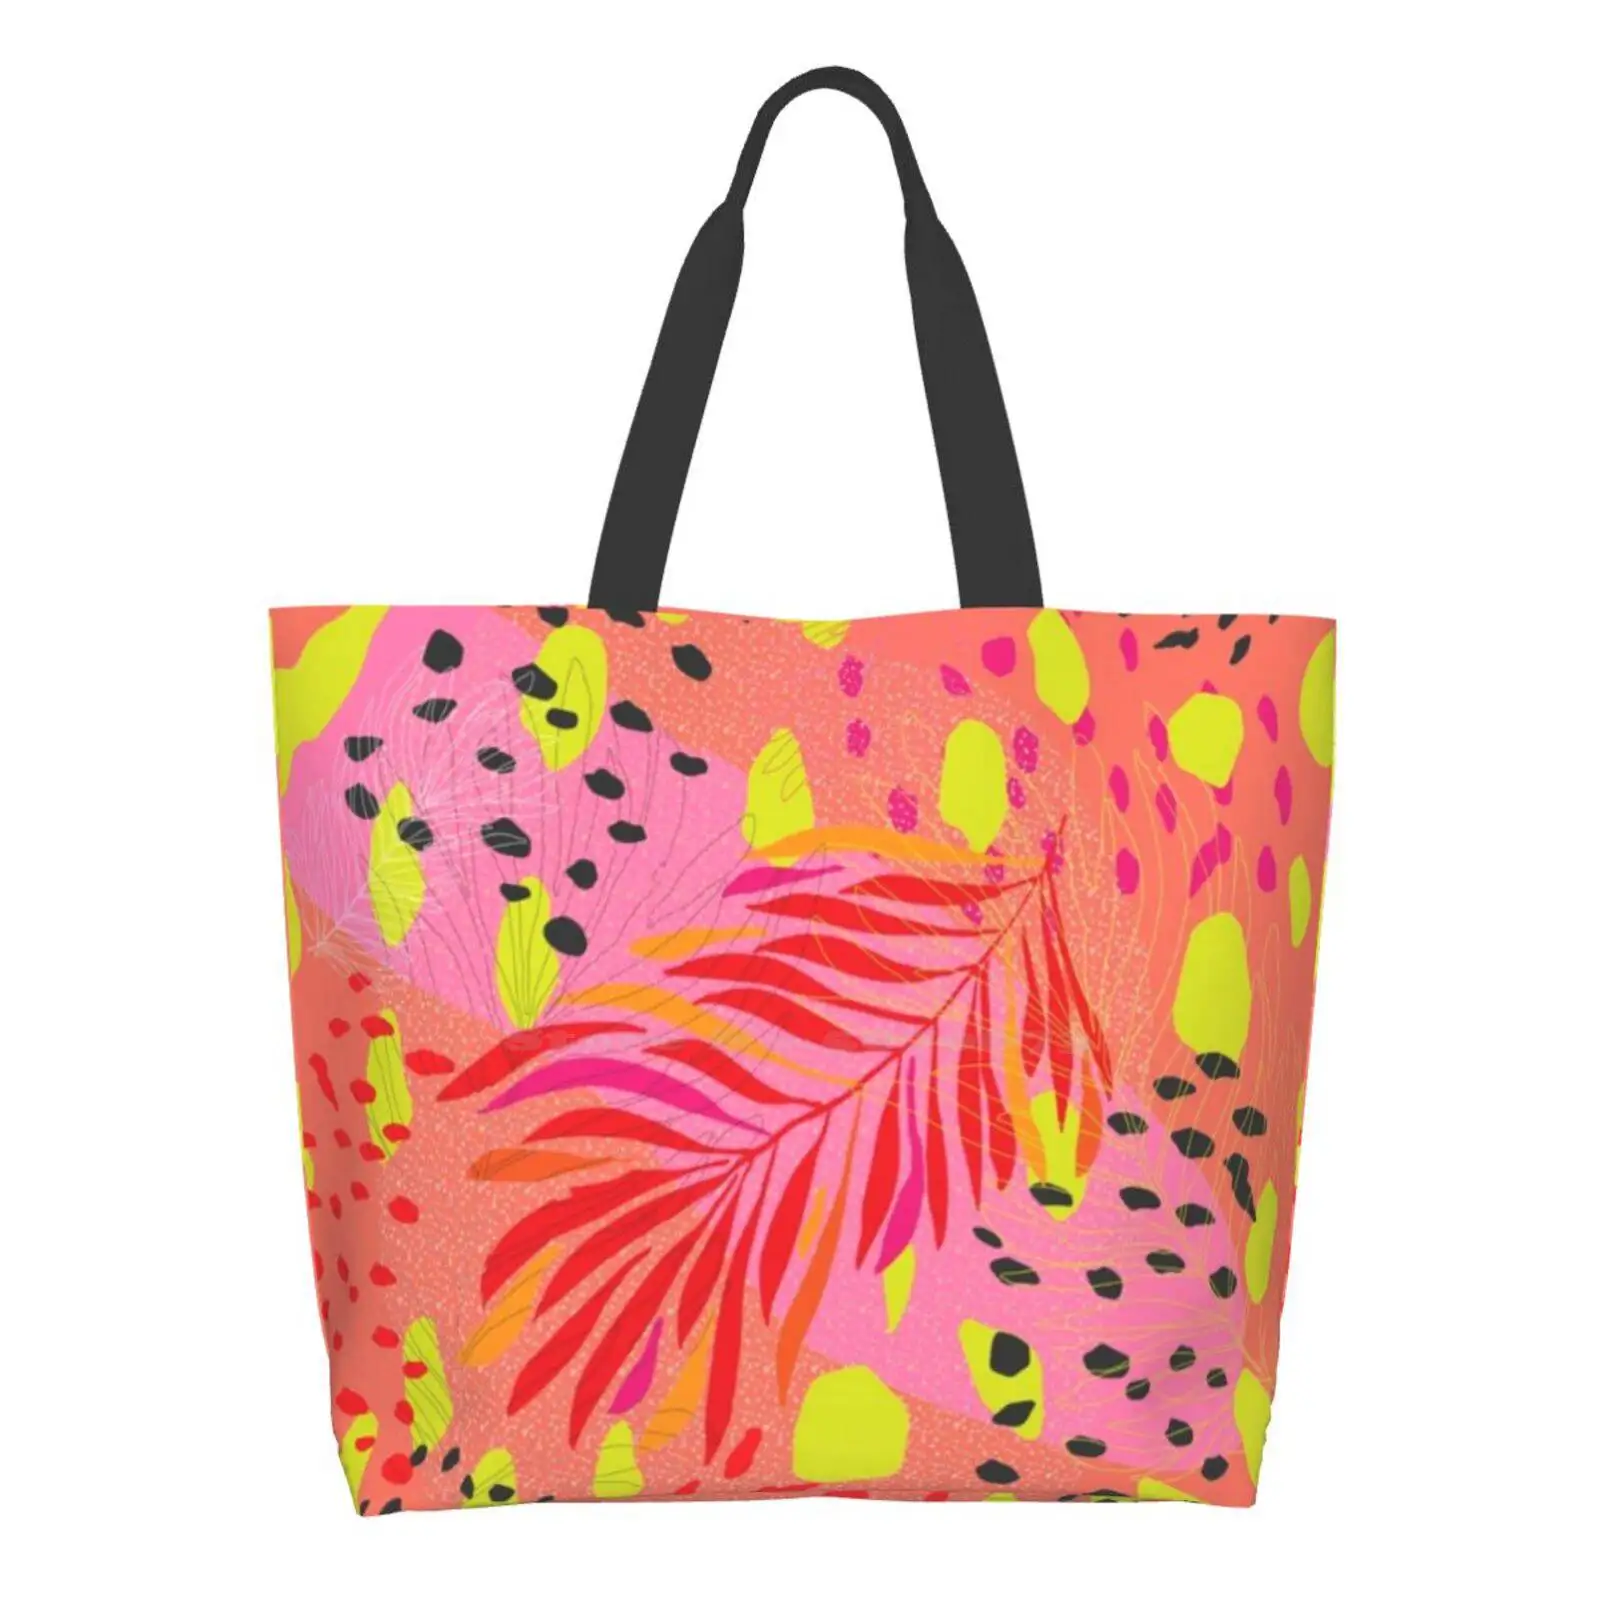 

Tangerine Seaweed High Quality Large Size Tote Bag Tangerine Orange Citron Lime Yellow Neon Palm Leaves Summer Bright Colors